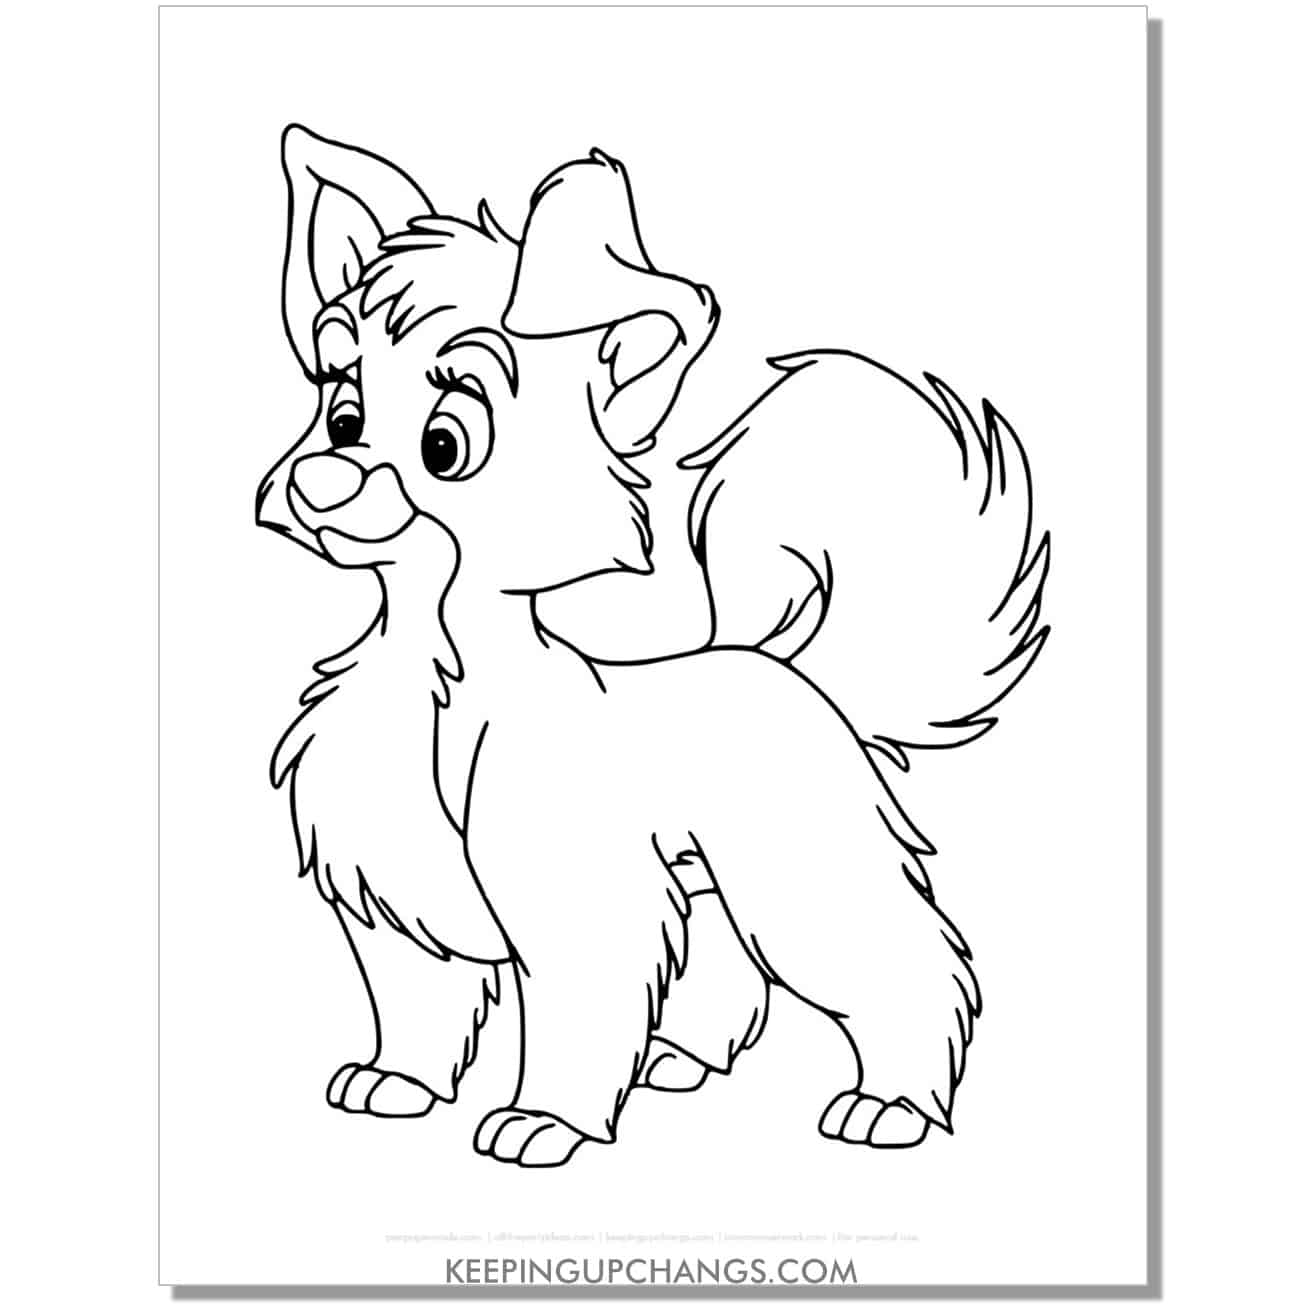 free angel from lady and the tramp coloring page, sheet.